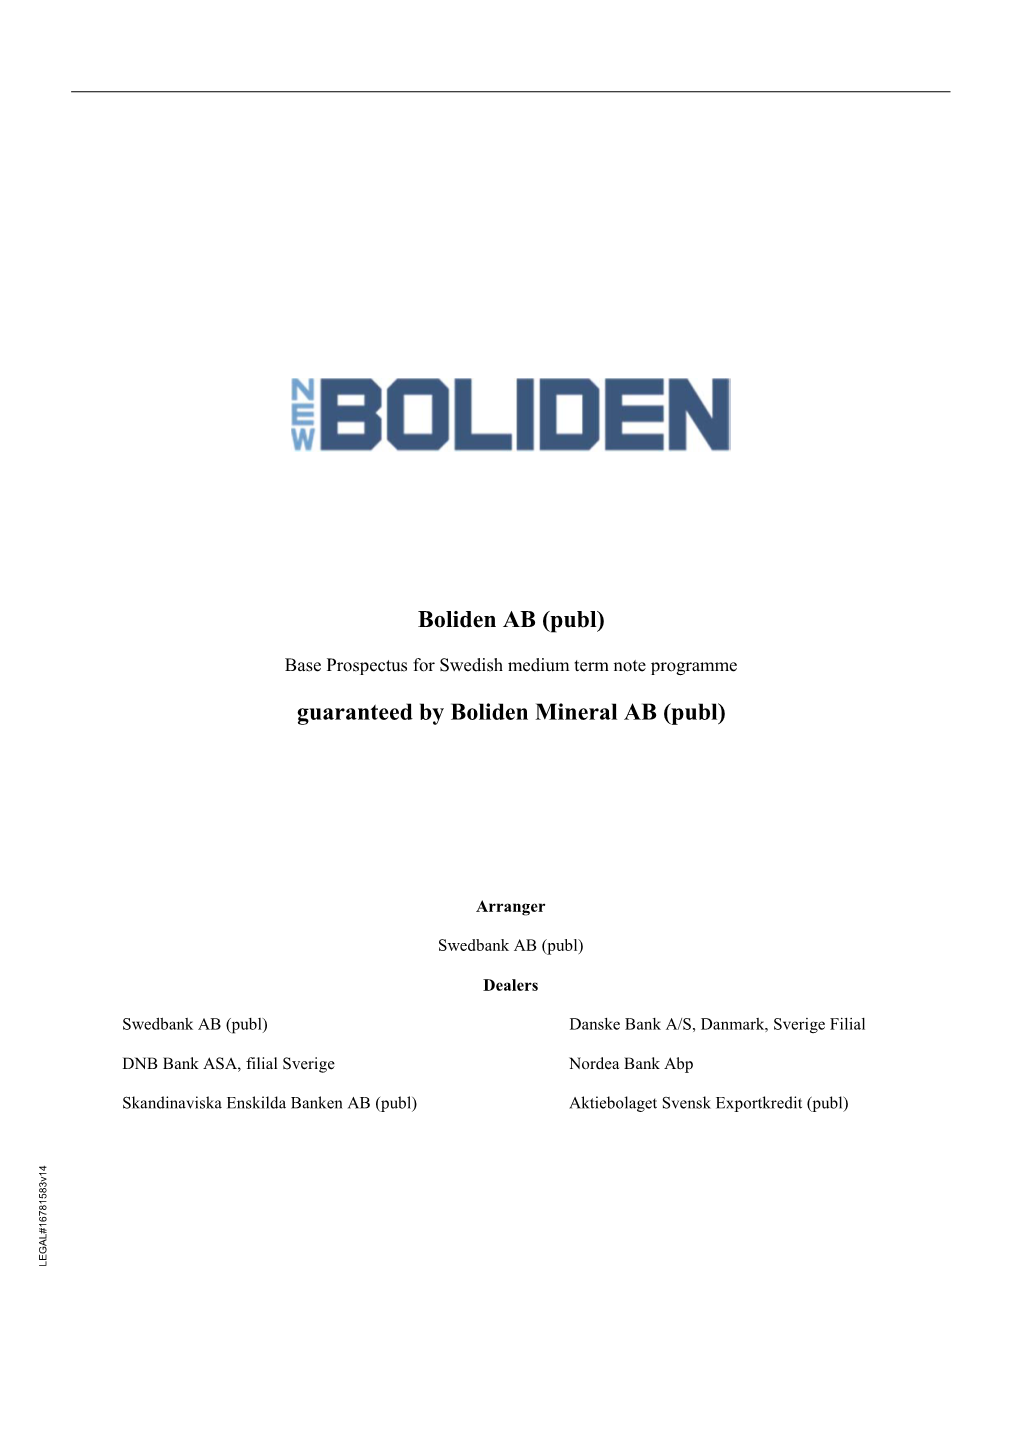 Boliden AB (Publ) Guaranteed by Boliden Mineral AB (Publ)